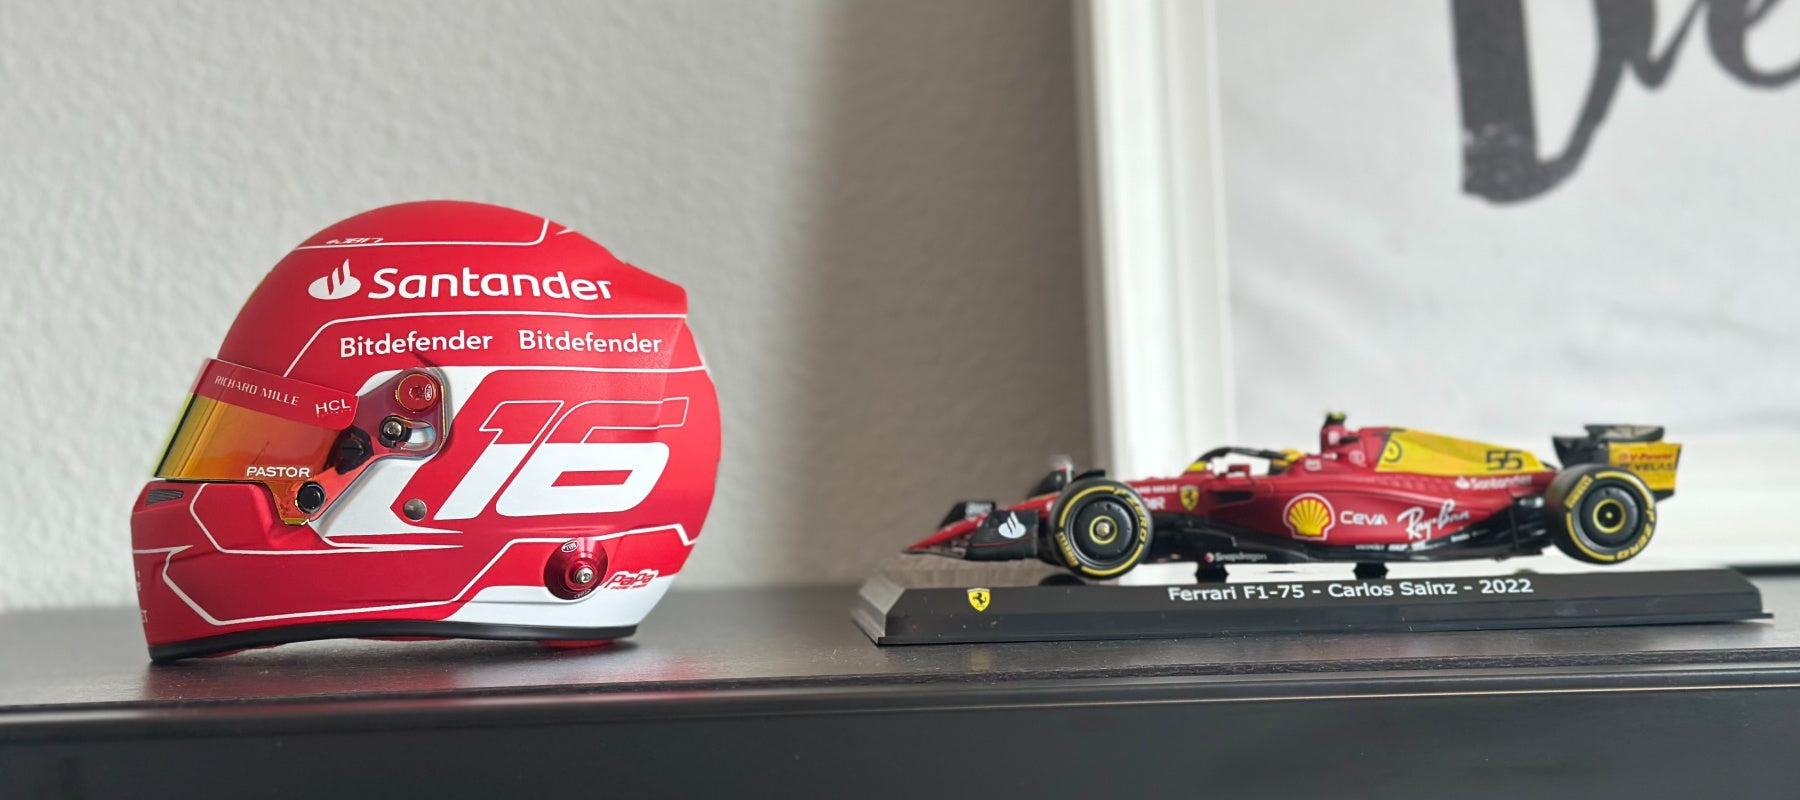 Mini Helmets From Top Motorsports Leagues as Formula 1®, Formula E®, IndyCar and More